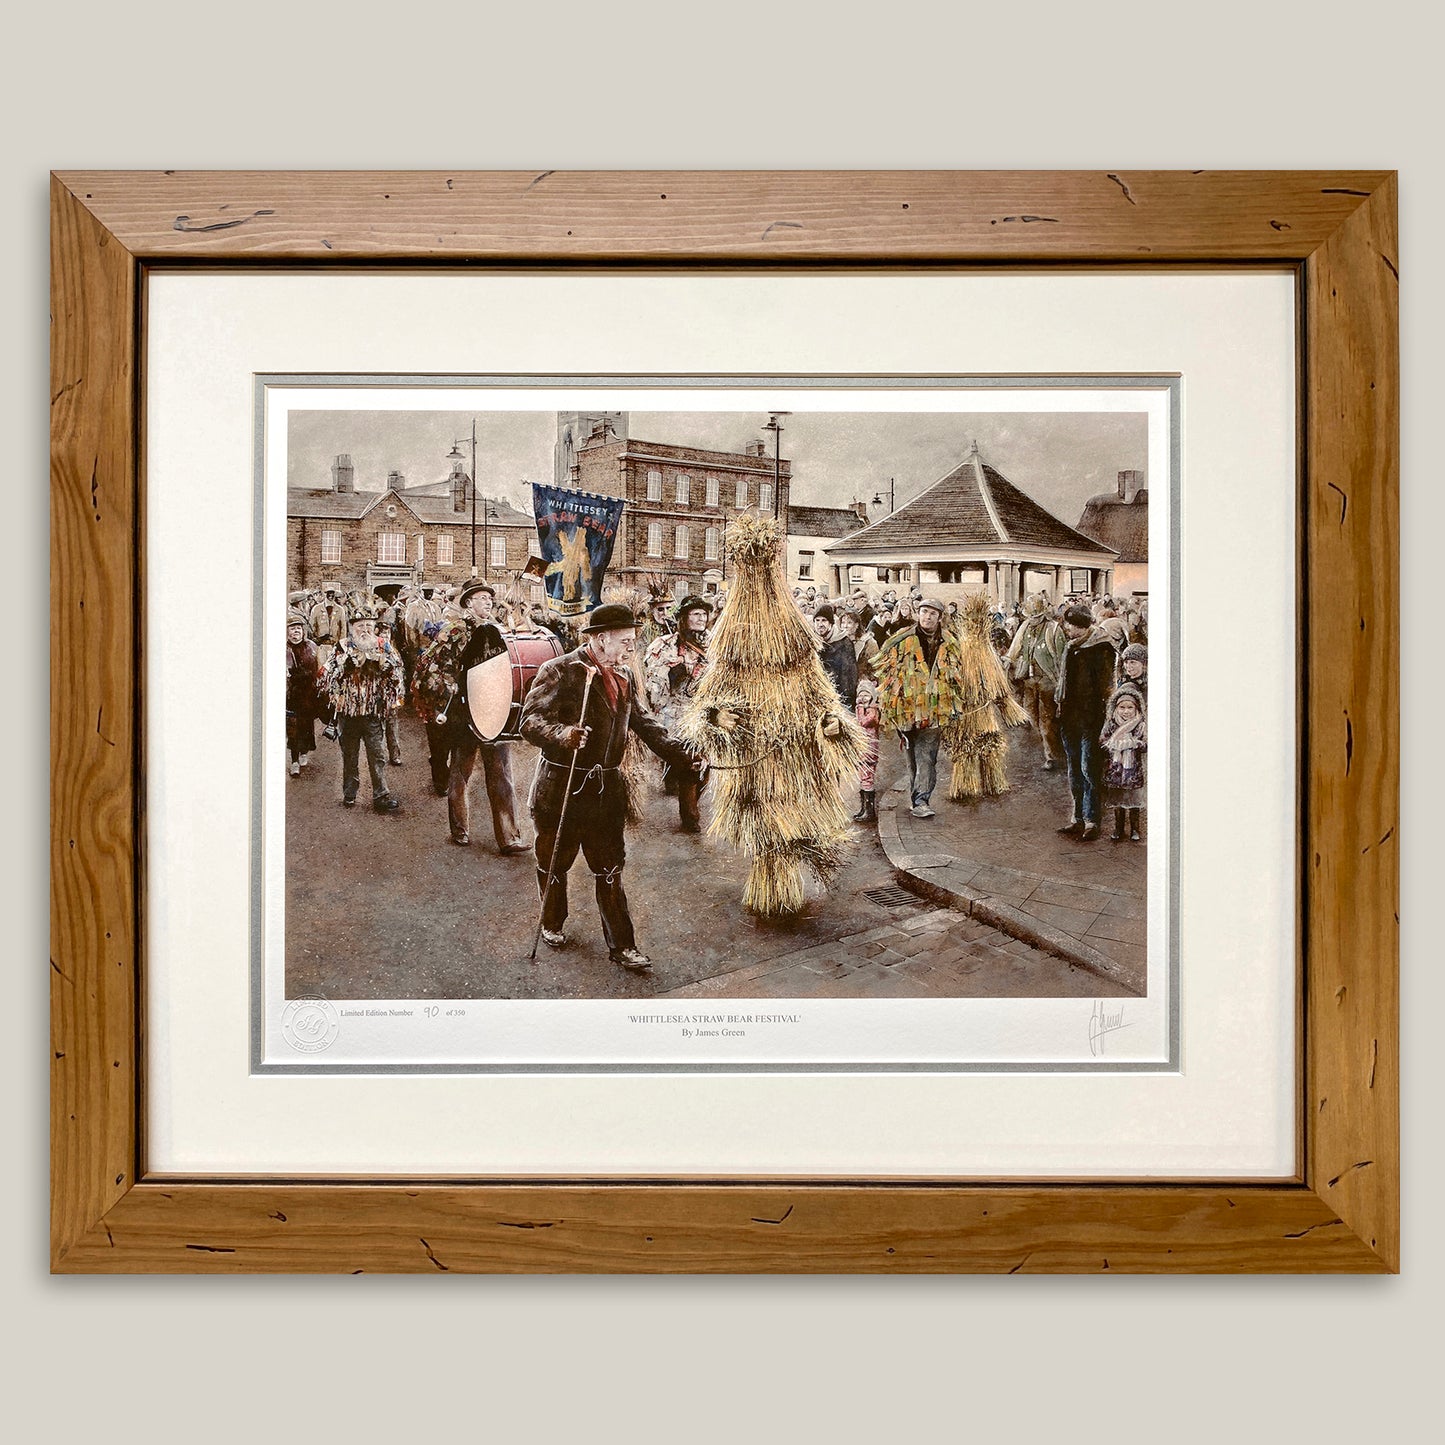 Whittlesey Straw Bear Festival Limited Edition Print